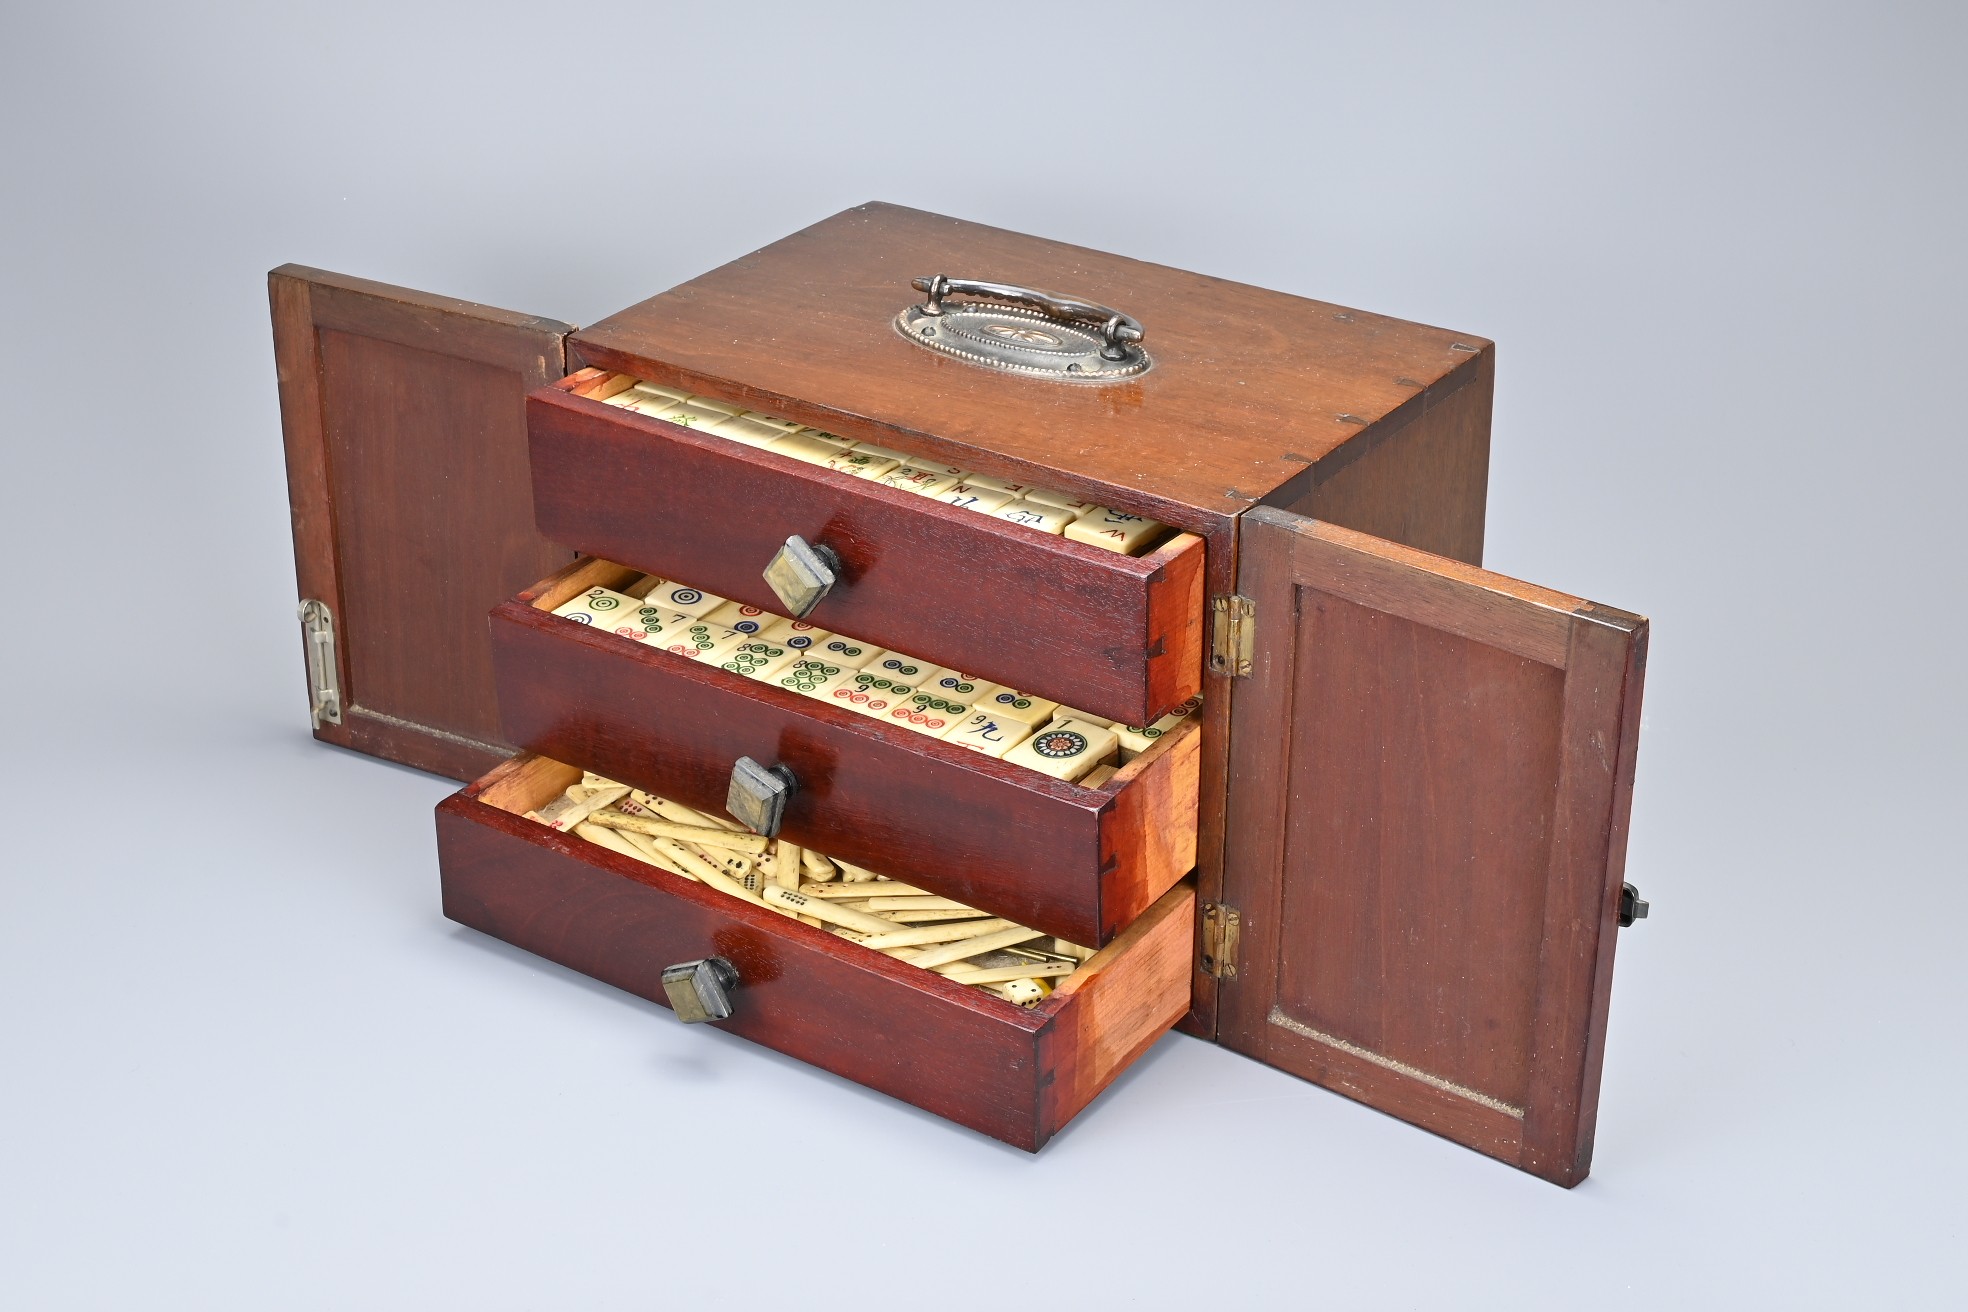 A CHINESE BOXED MAHJONG SET, EARLY 20TH CENTURY. Bone and bamboo pieces within a hardwood carrying - Image 6 of 8